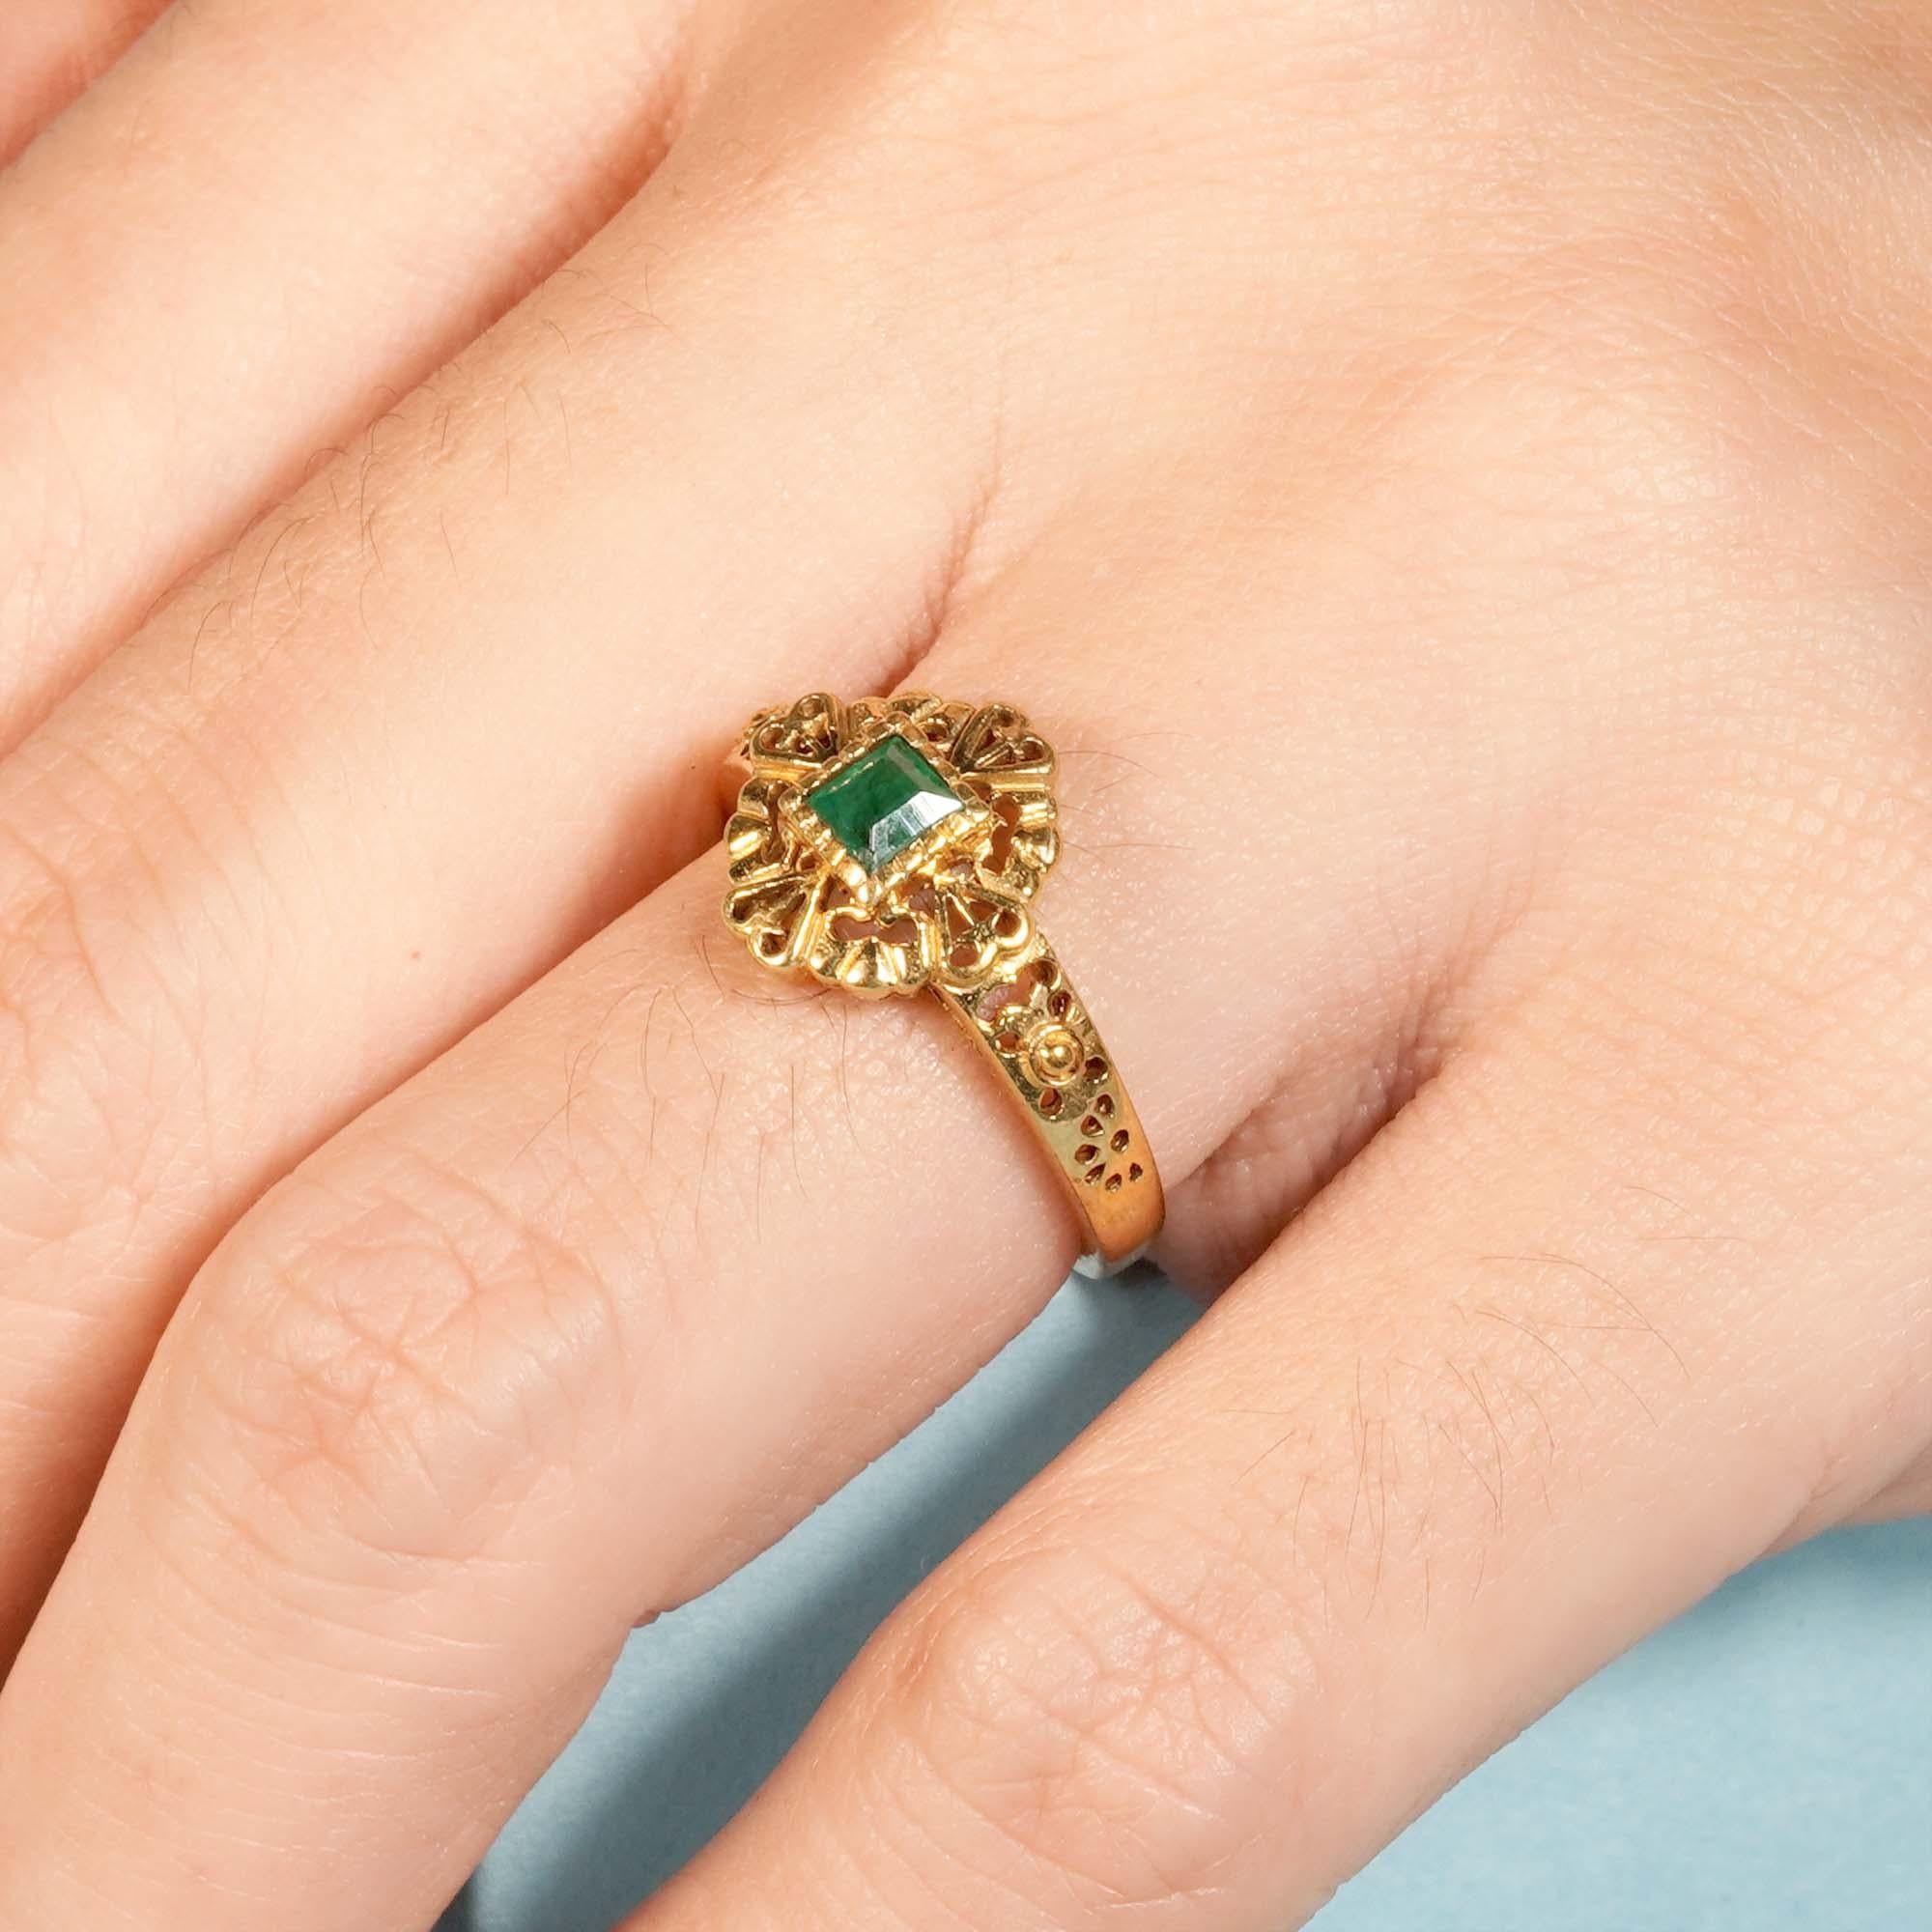 For Sale:  Natural Square Emerald Vintage Style Solitaire Heart Filigree Ring in 9K Gold 11